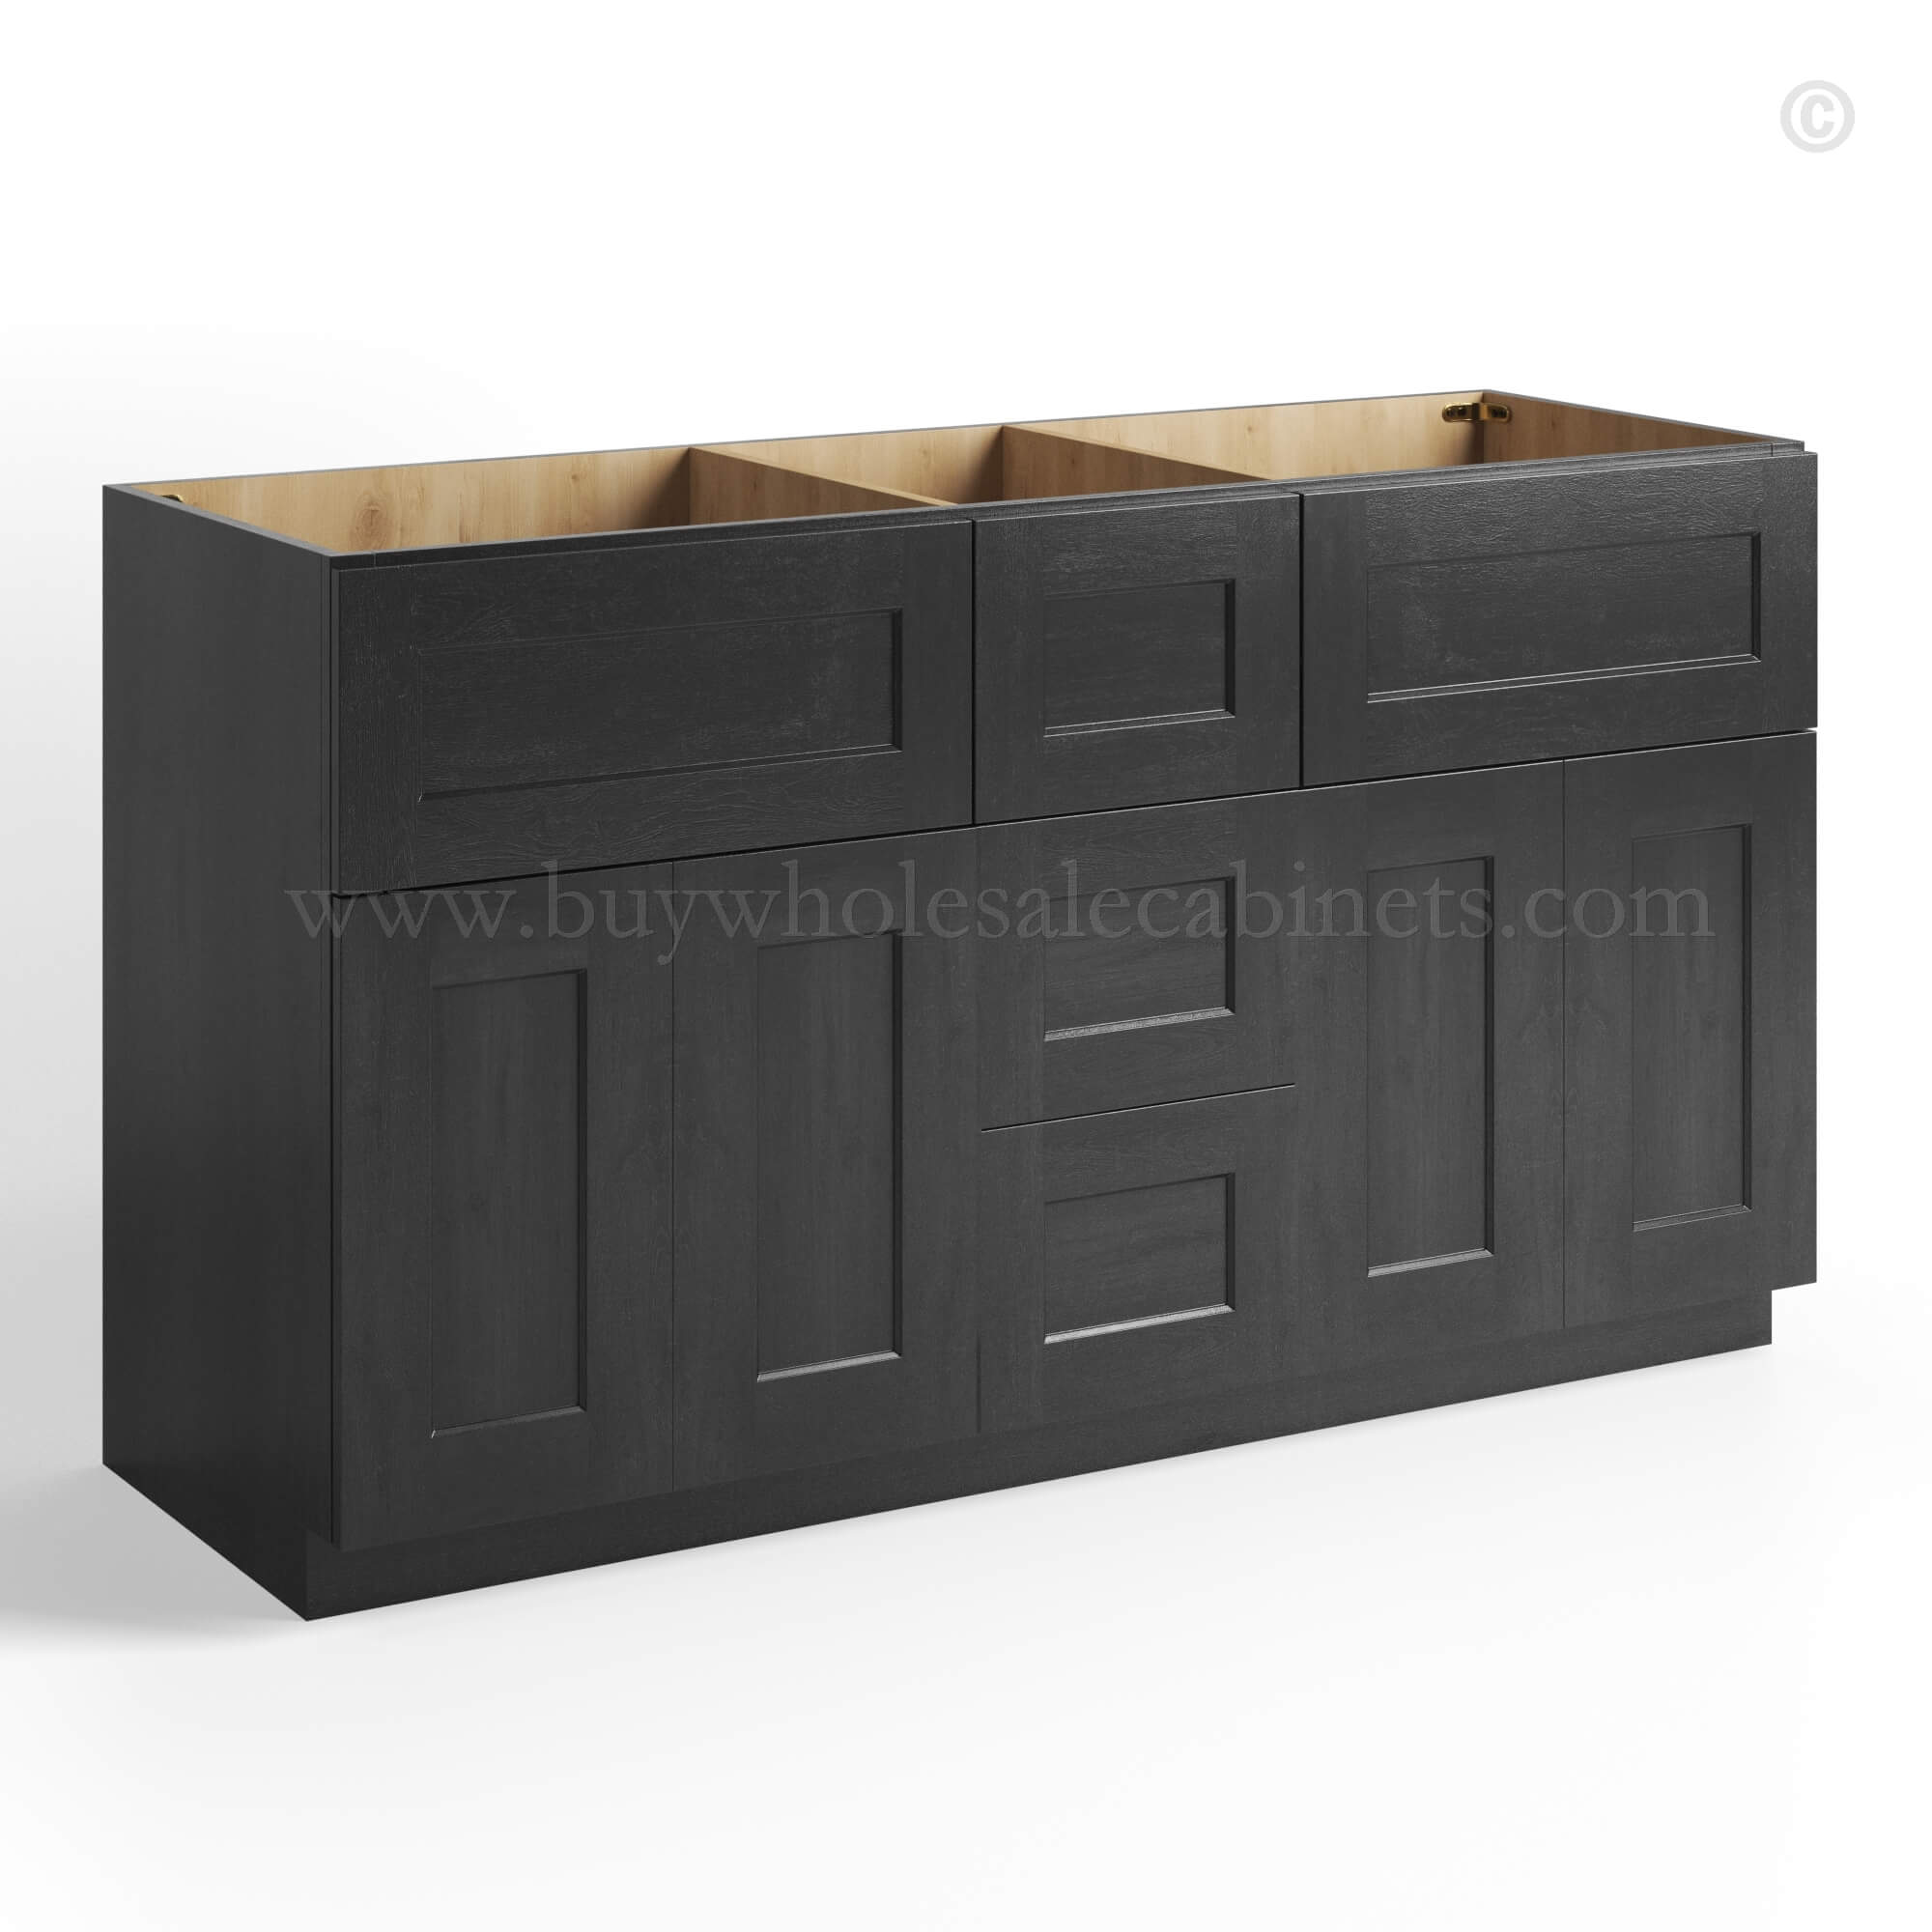 charcoal black shaker vanity sink base combo with three drawer middle and double sink, rta cabinets, wholesale cabinets